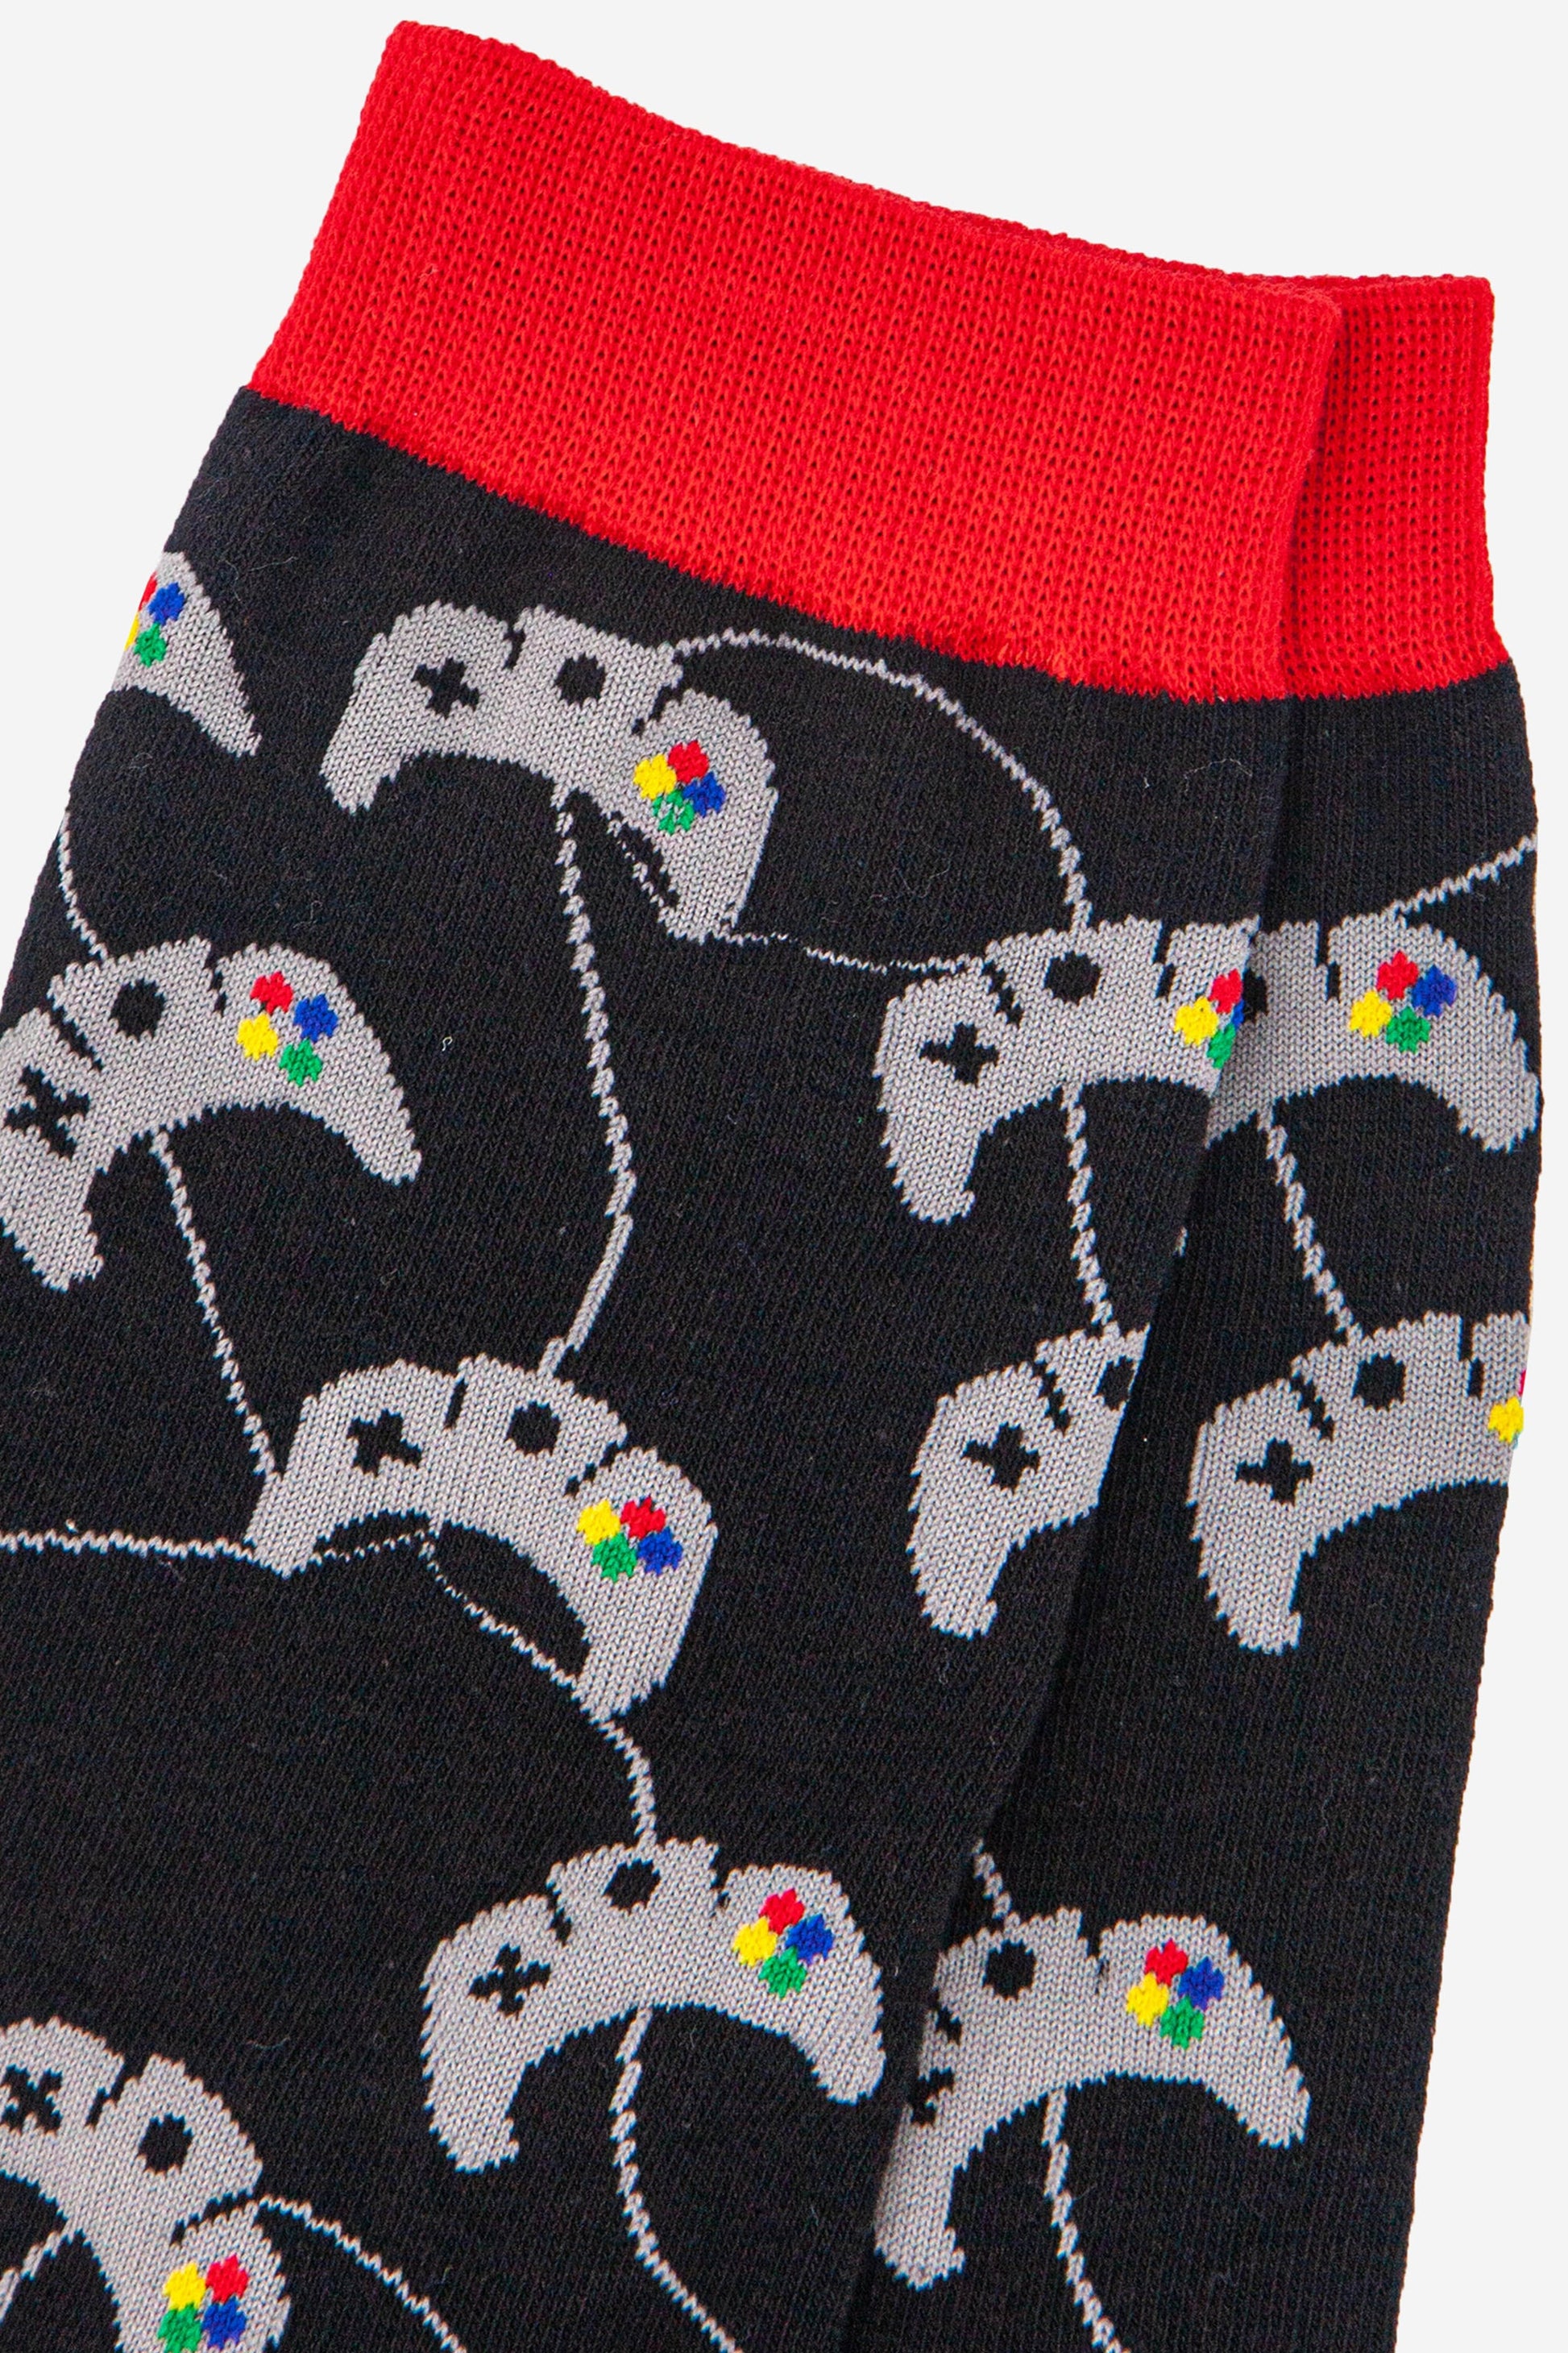 close up of the game console controller pattern on the ankle socks